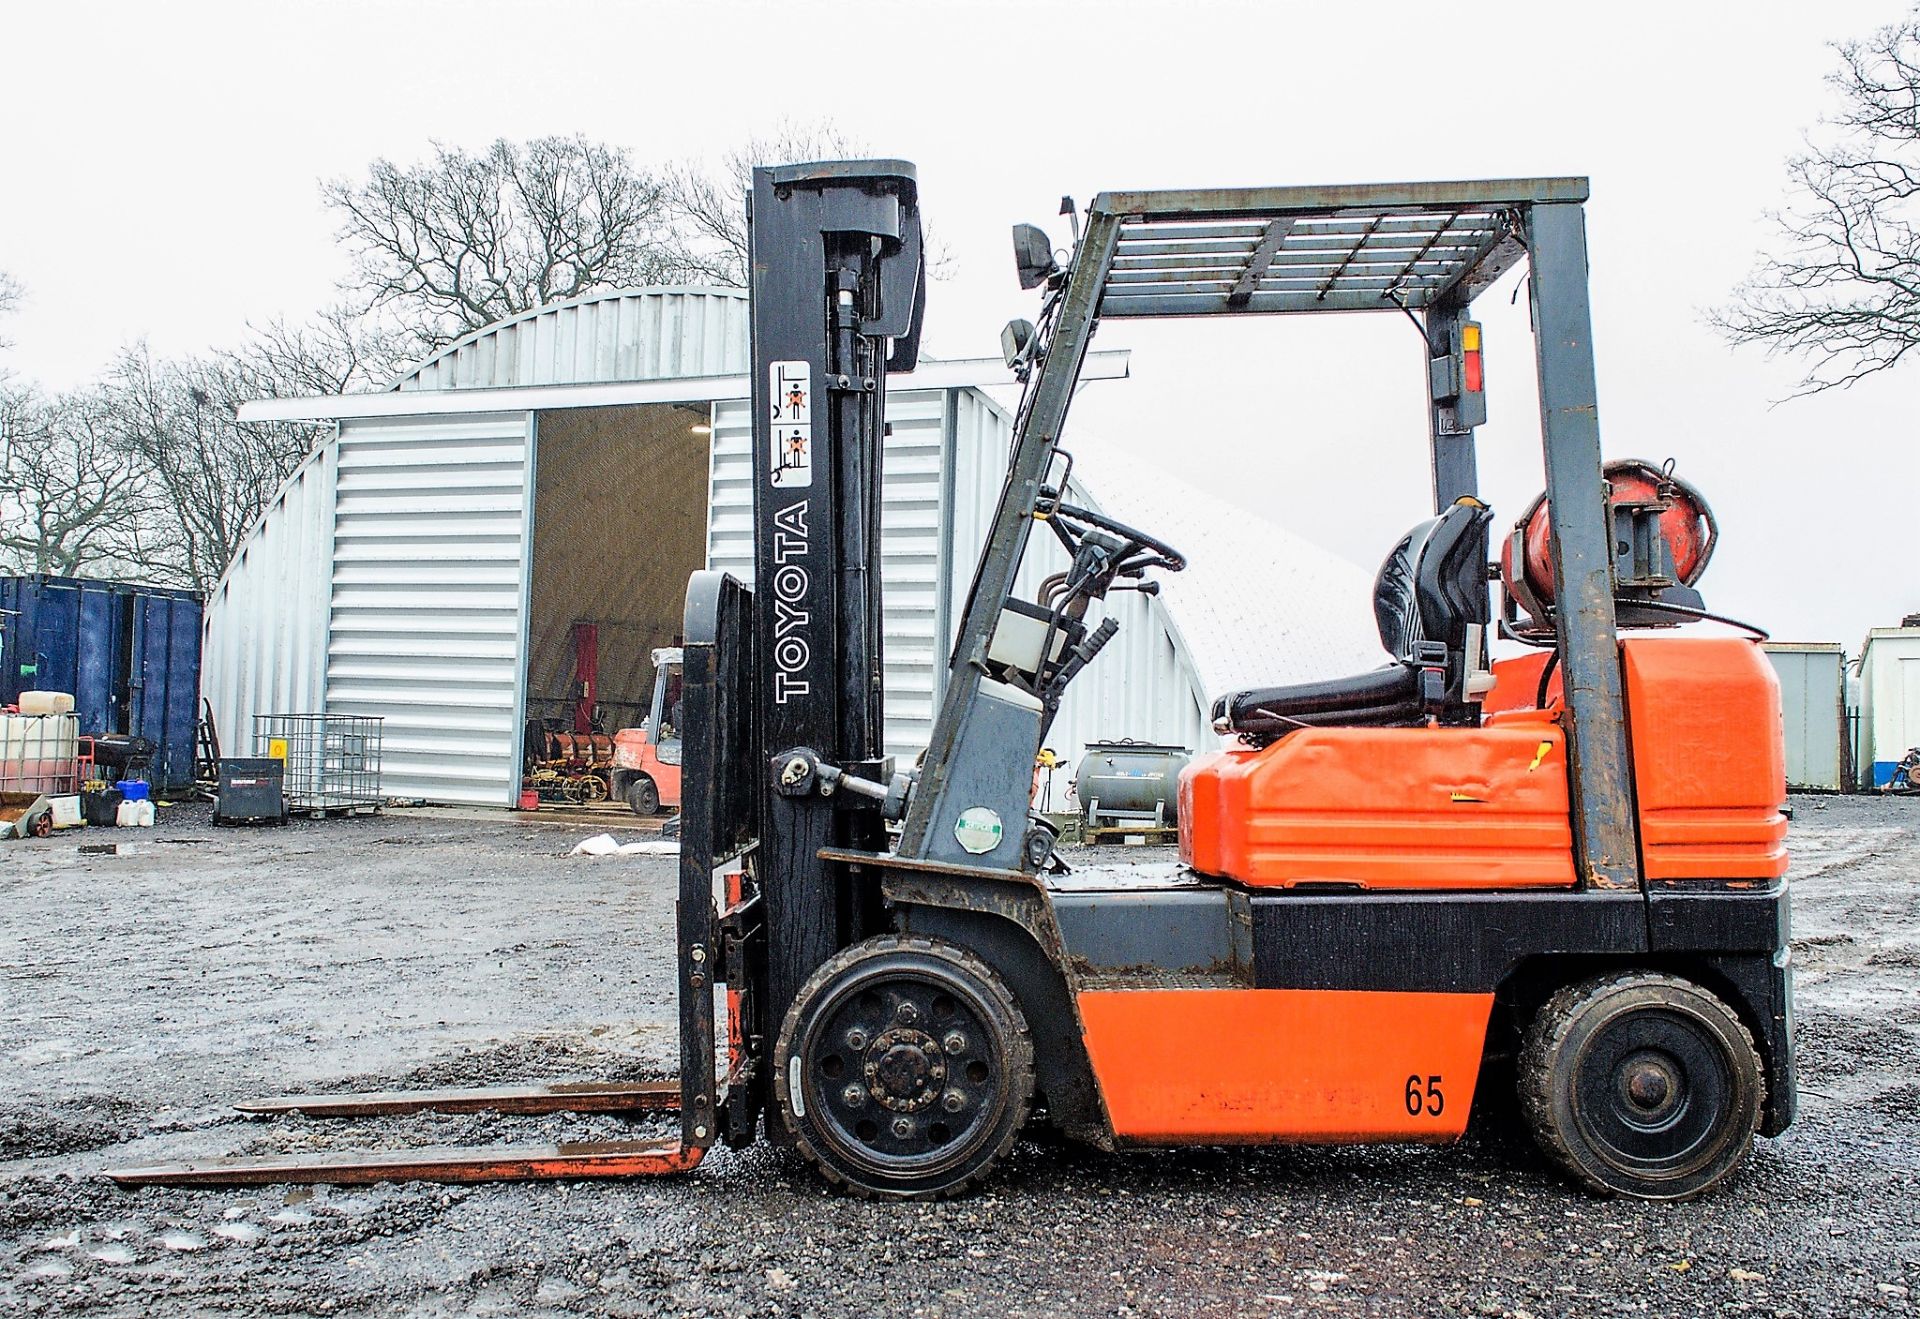 Toyota SFGC25 2.5 tonne gas powered fork lift truck Year: 1995 S/N: 83483 Recorded Hours: 13302 333 - Image 7 of 14